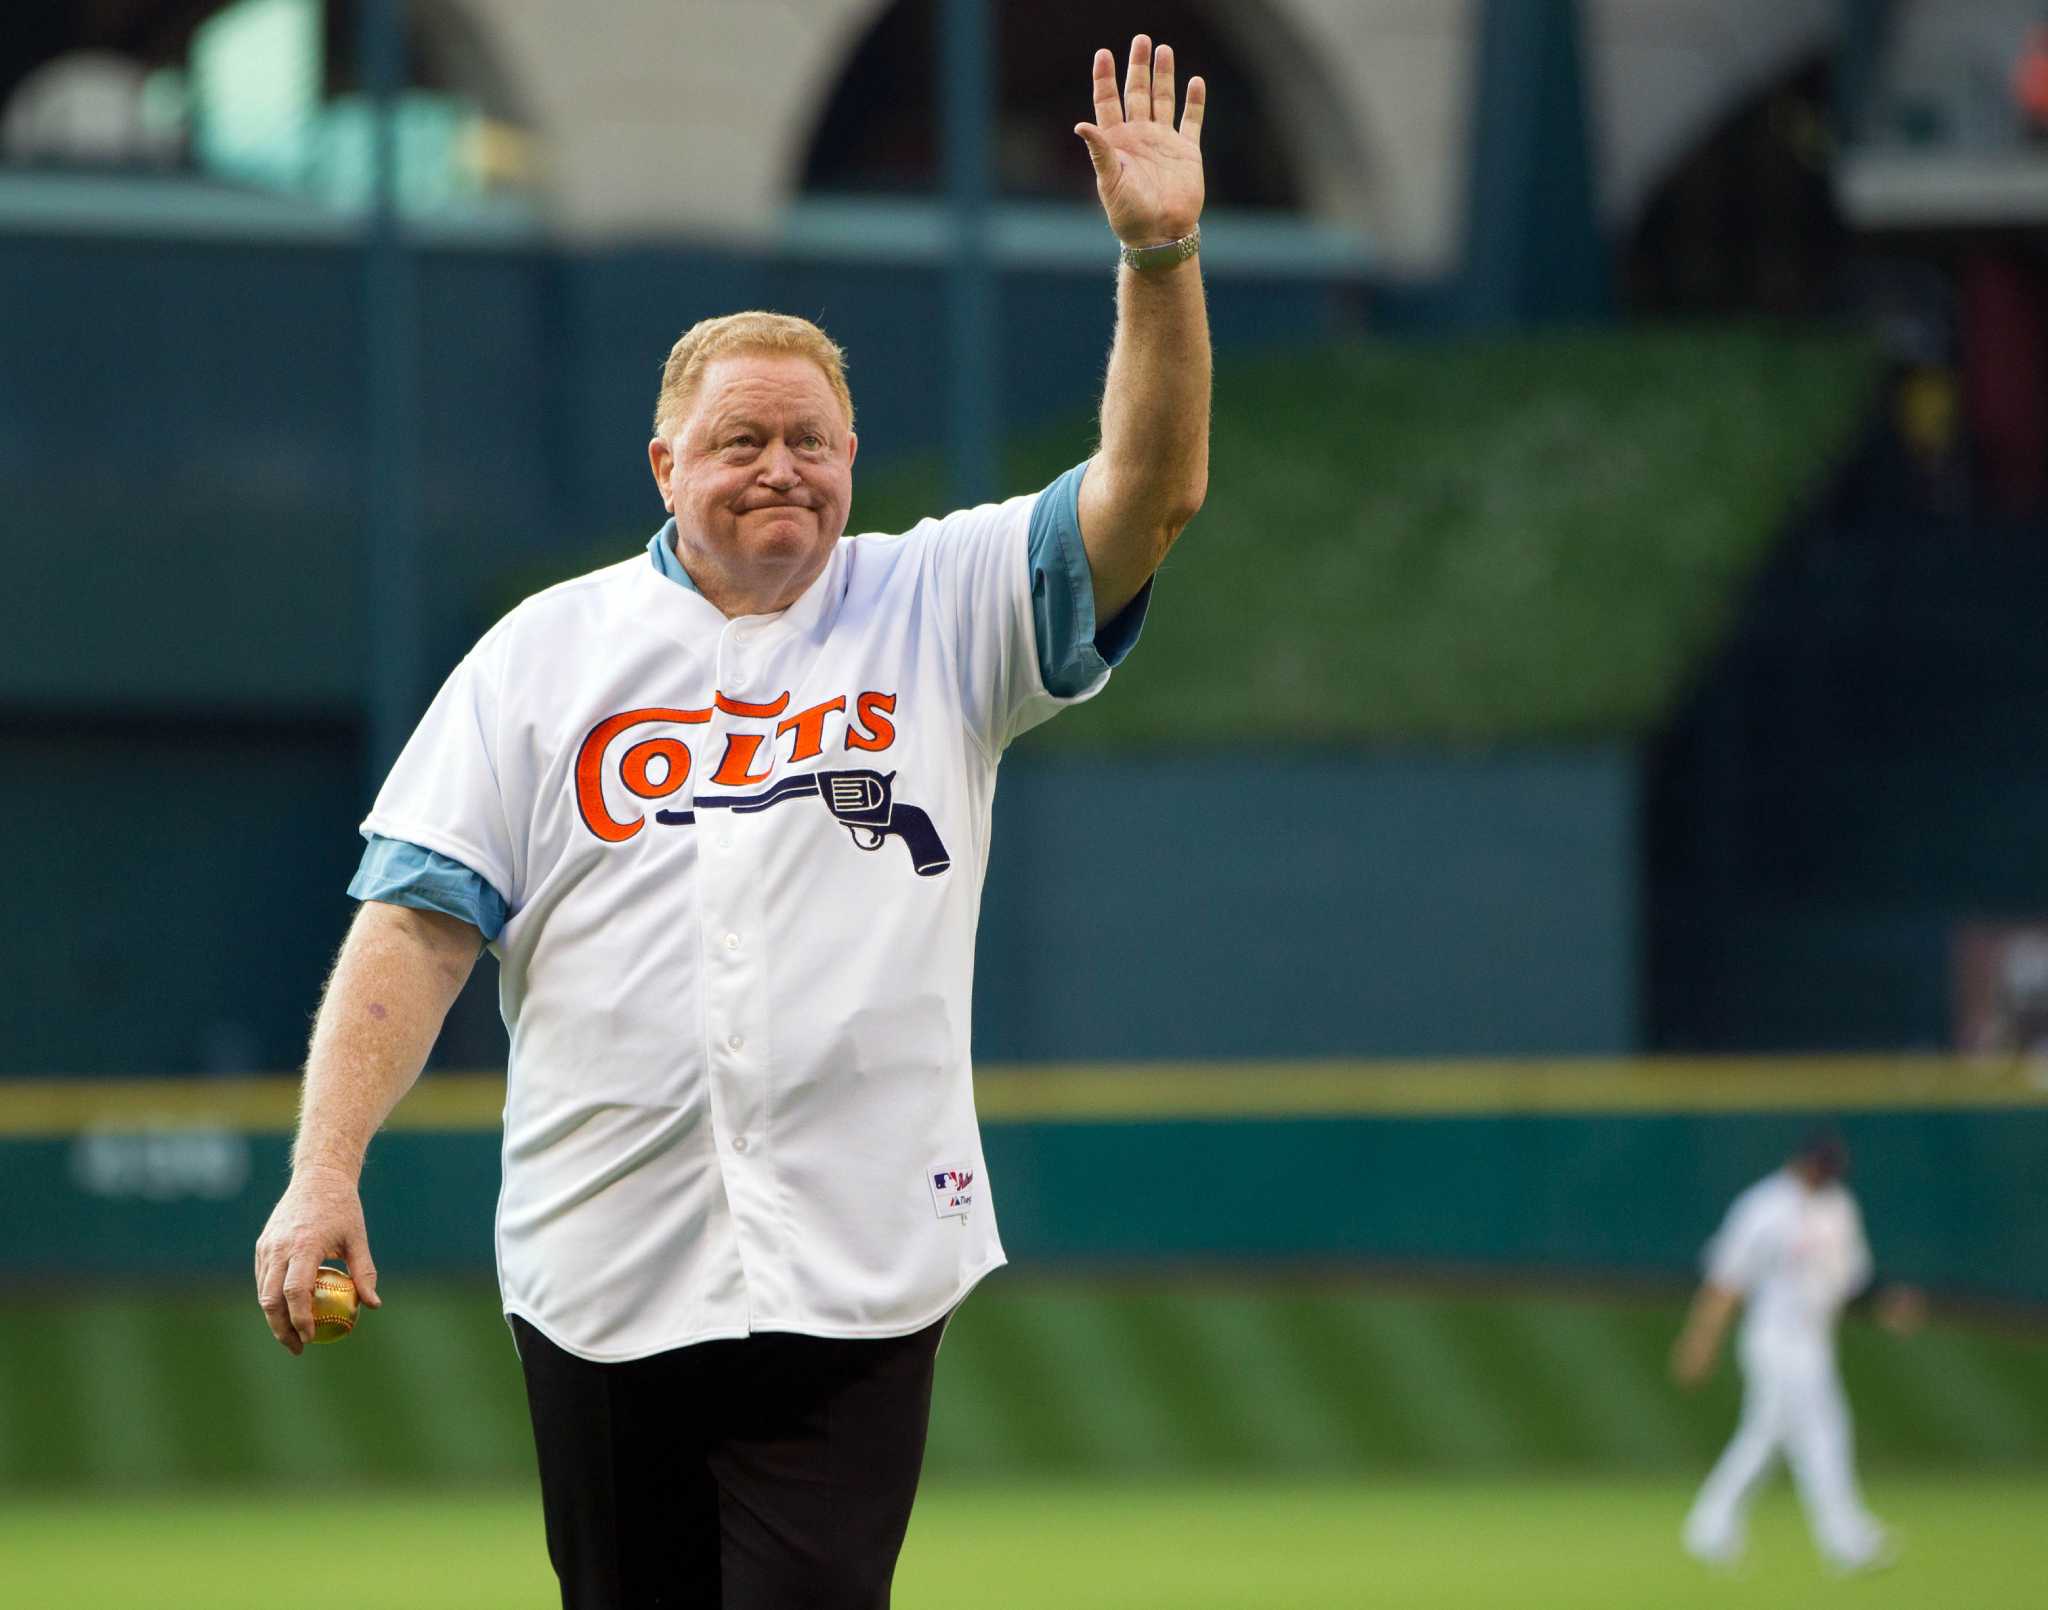 Rusty Staub, beloved Mets slugger who broke into majors with Colt .45s/ Astros, dies at 73